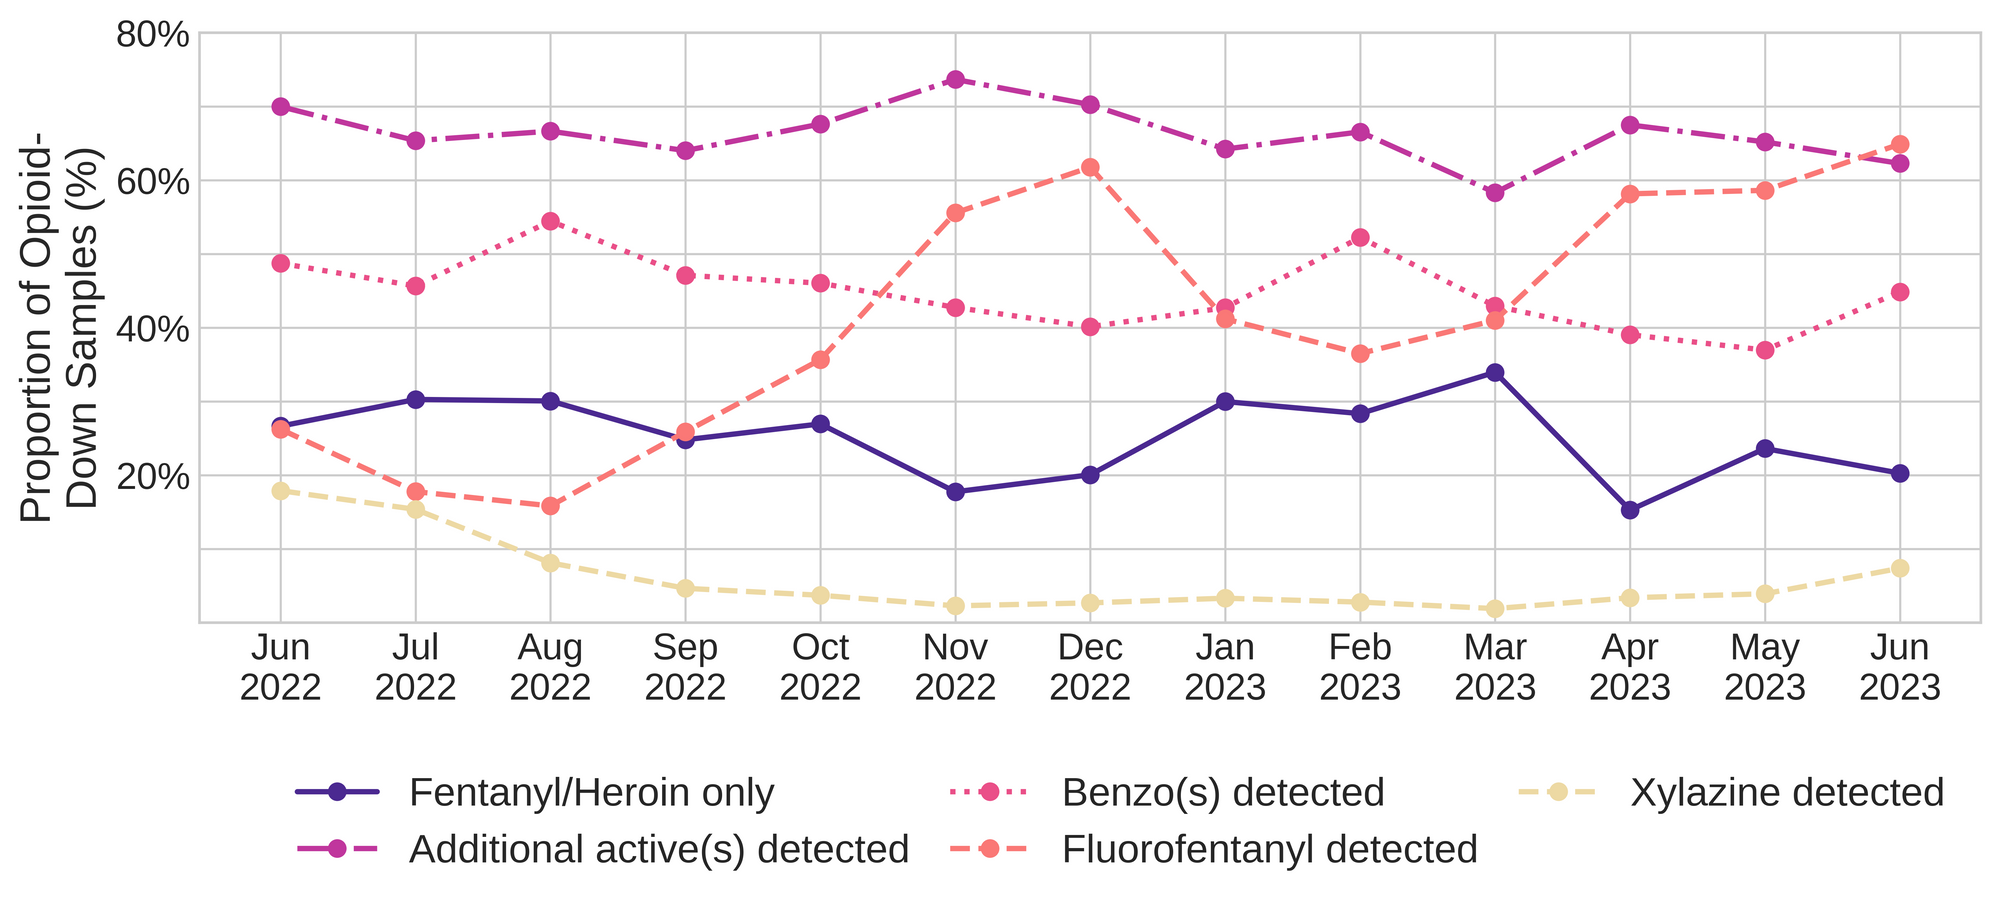 Figure 3. The percentage of expected opioid-down samples checked between June 2022 and June 2023 that only contained fentanyl/heroin actives (solid dark purple), opioid-down samples with an additional active detected (dot-dashed magenta), opioid-down samples that contained a benzodiazepine-related drug (dotted pink), opioid-down samples that contained fluorofentanyl (dashed salmon), and opioid-down samples that contained xylazine (dashed yellow).